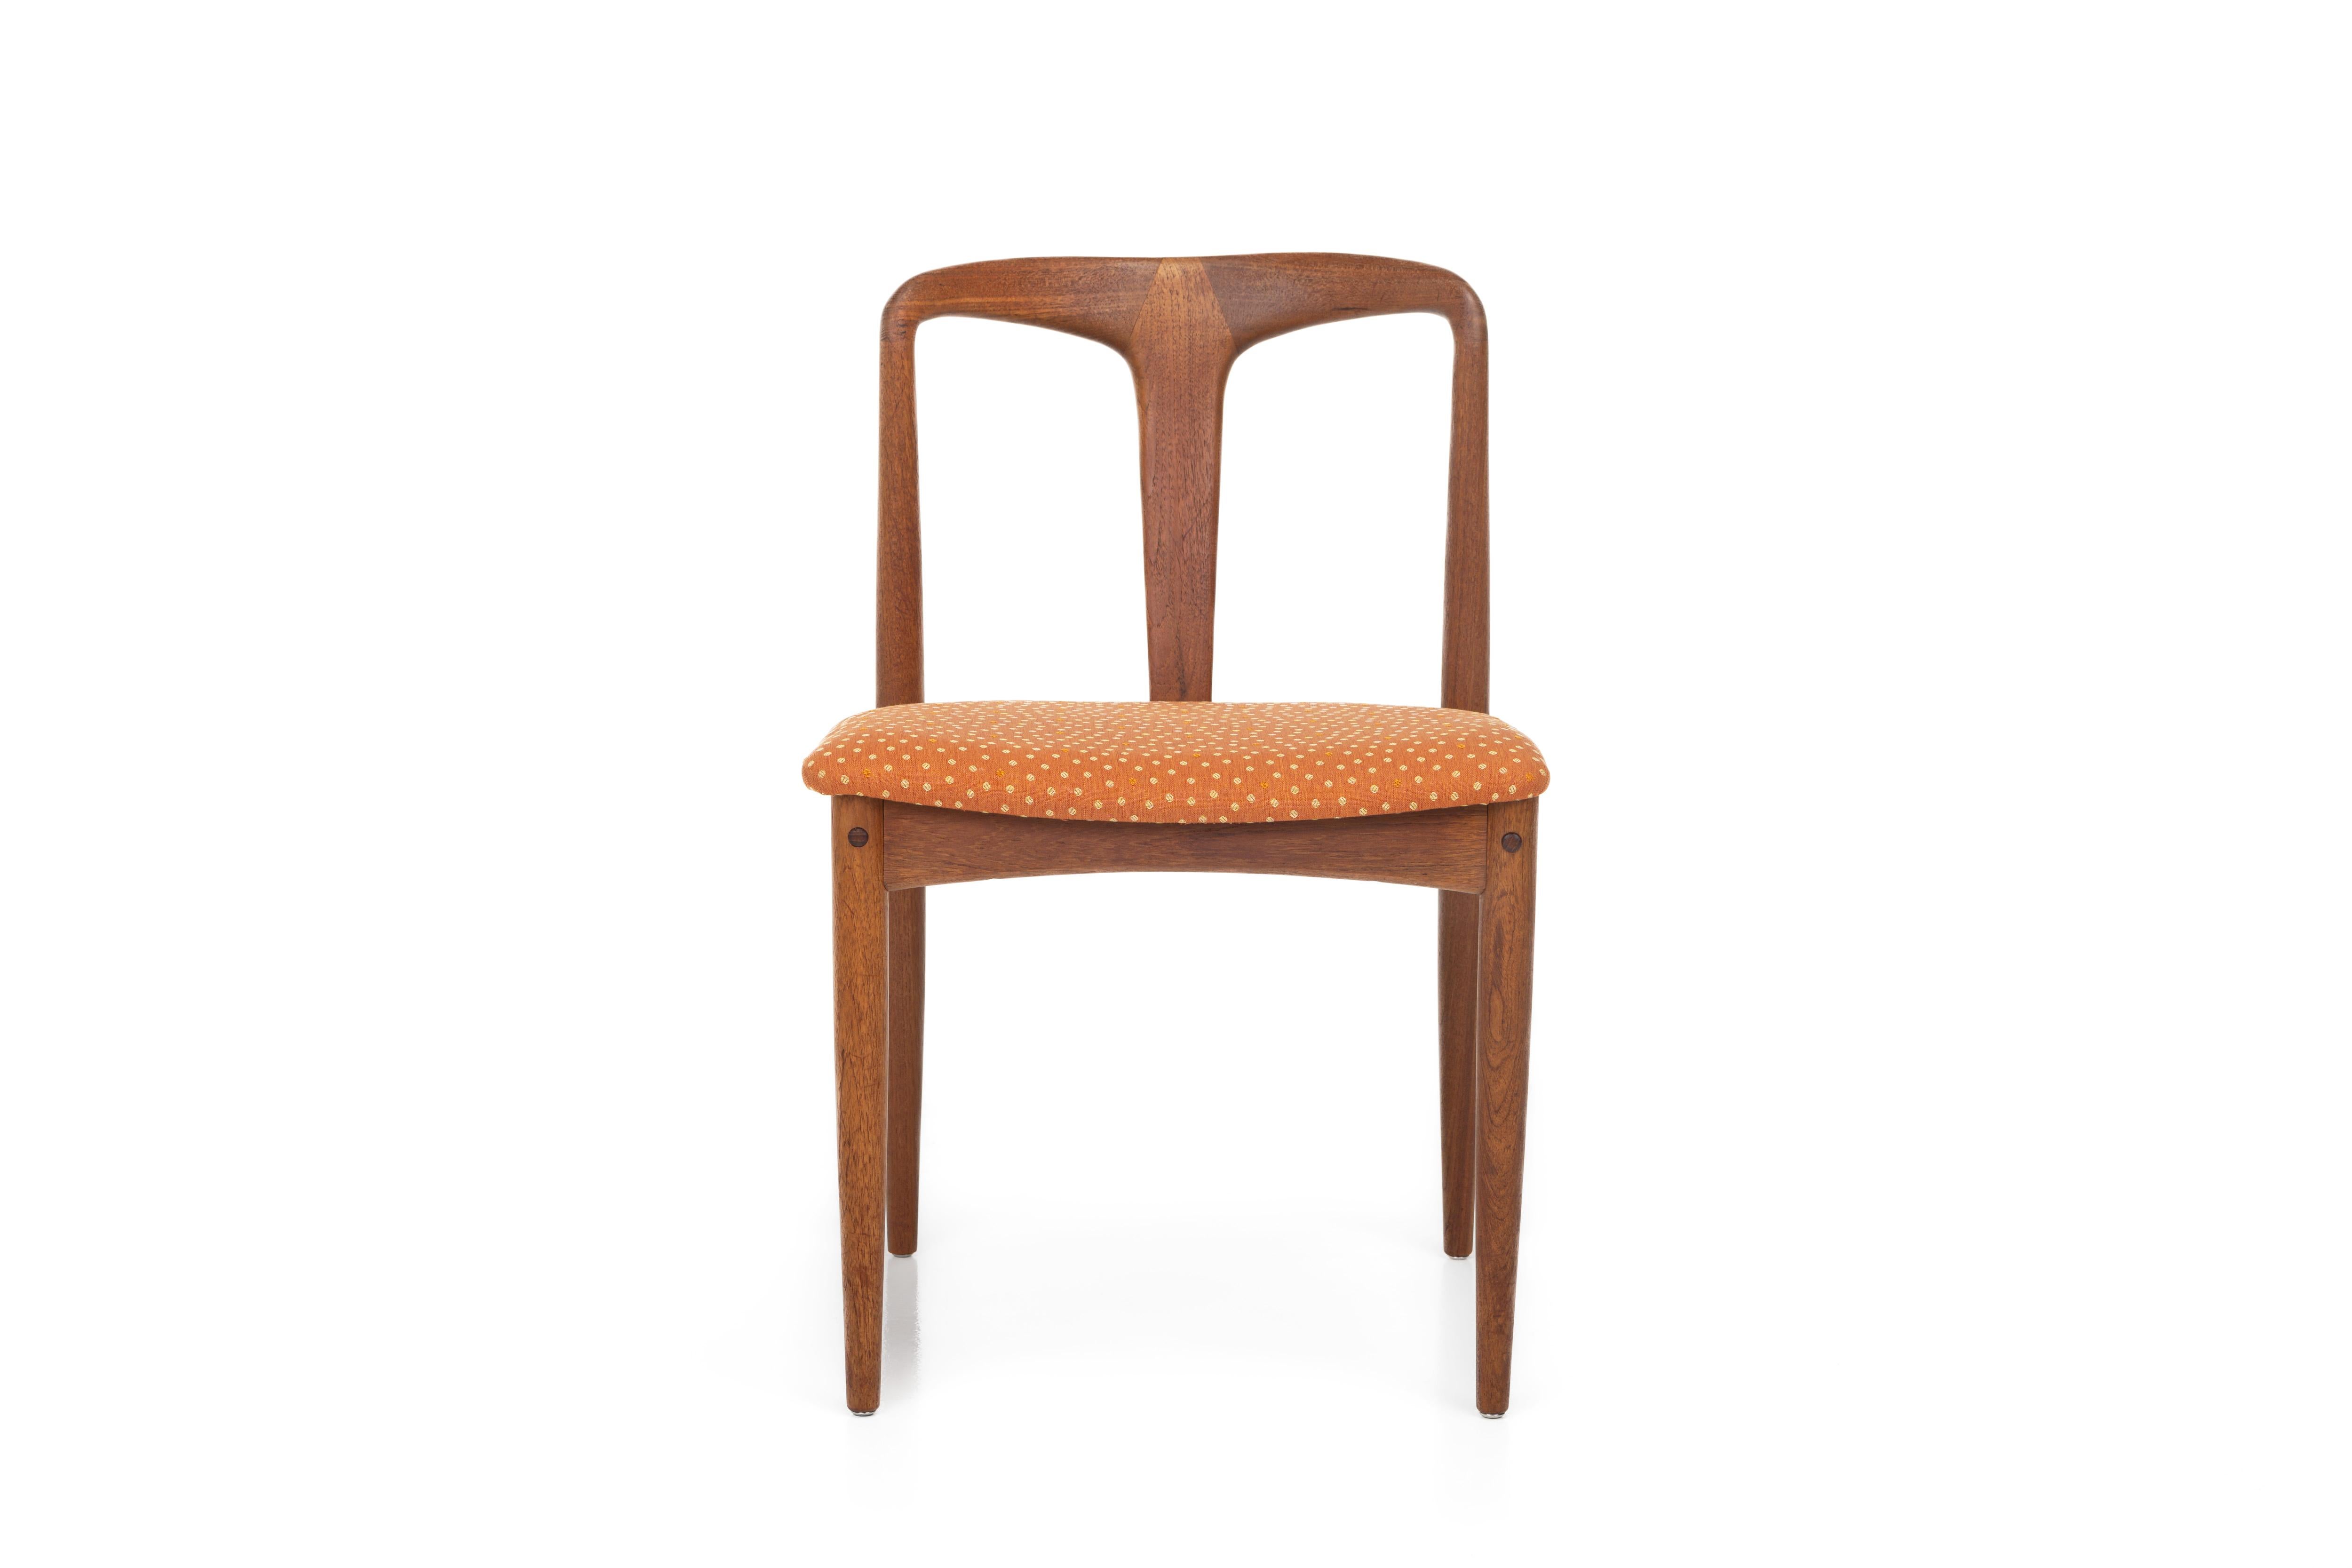 Set of 6 dining chairs by Johannes Andersen for Uldum Møbelfabrik in Denmark 196 For Sale 1